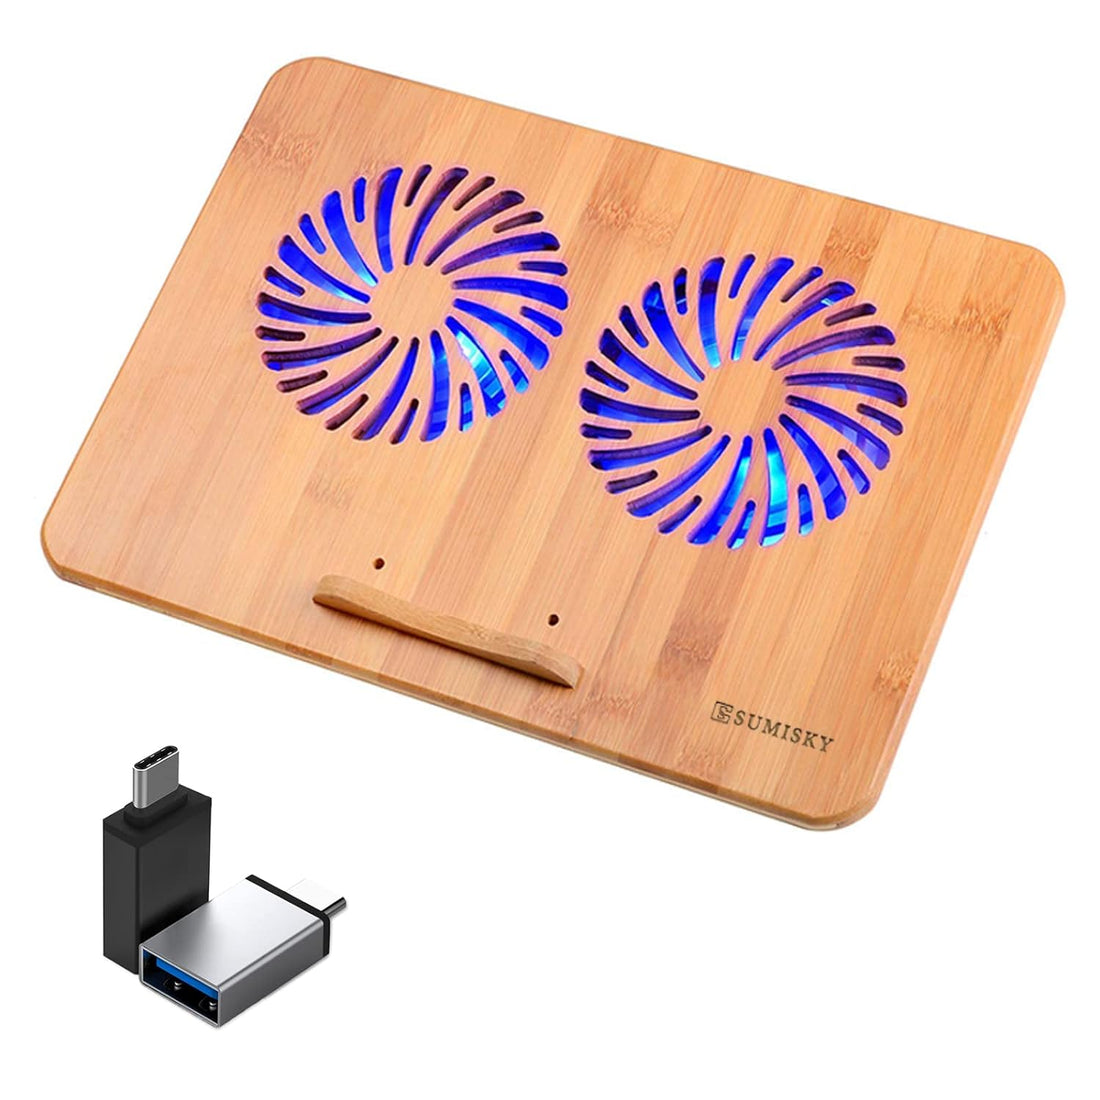 SUMISKY Laptop Stand Cooling Pad 100% Bamboo Adjustable Laptop Desk with 2 Quiet Cooling Fans Blue Light and 2 USB Ports Ergonomic Cooler Pad (15"x11" with 2 Pack USB C to USB Adapter)